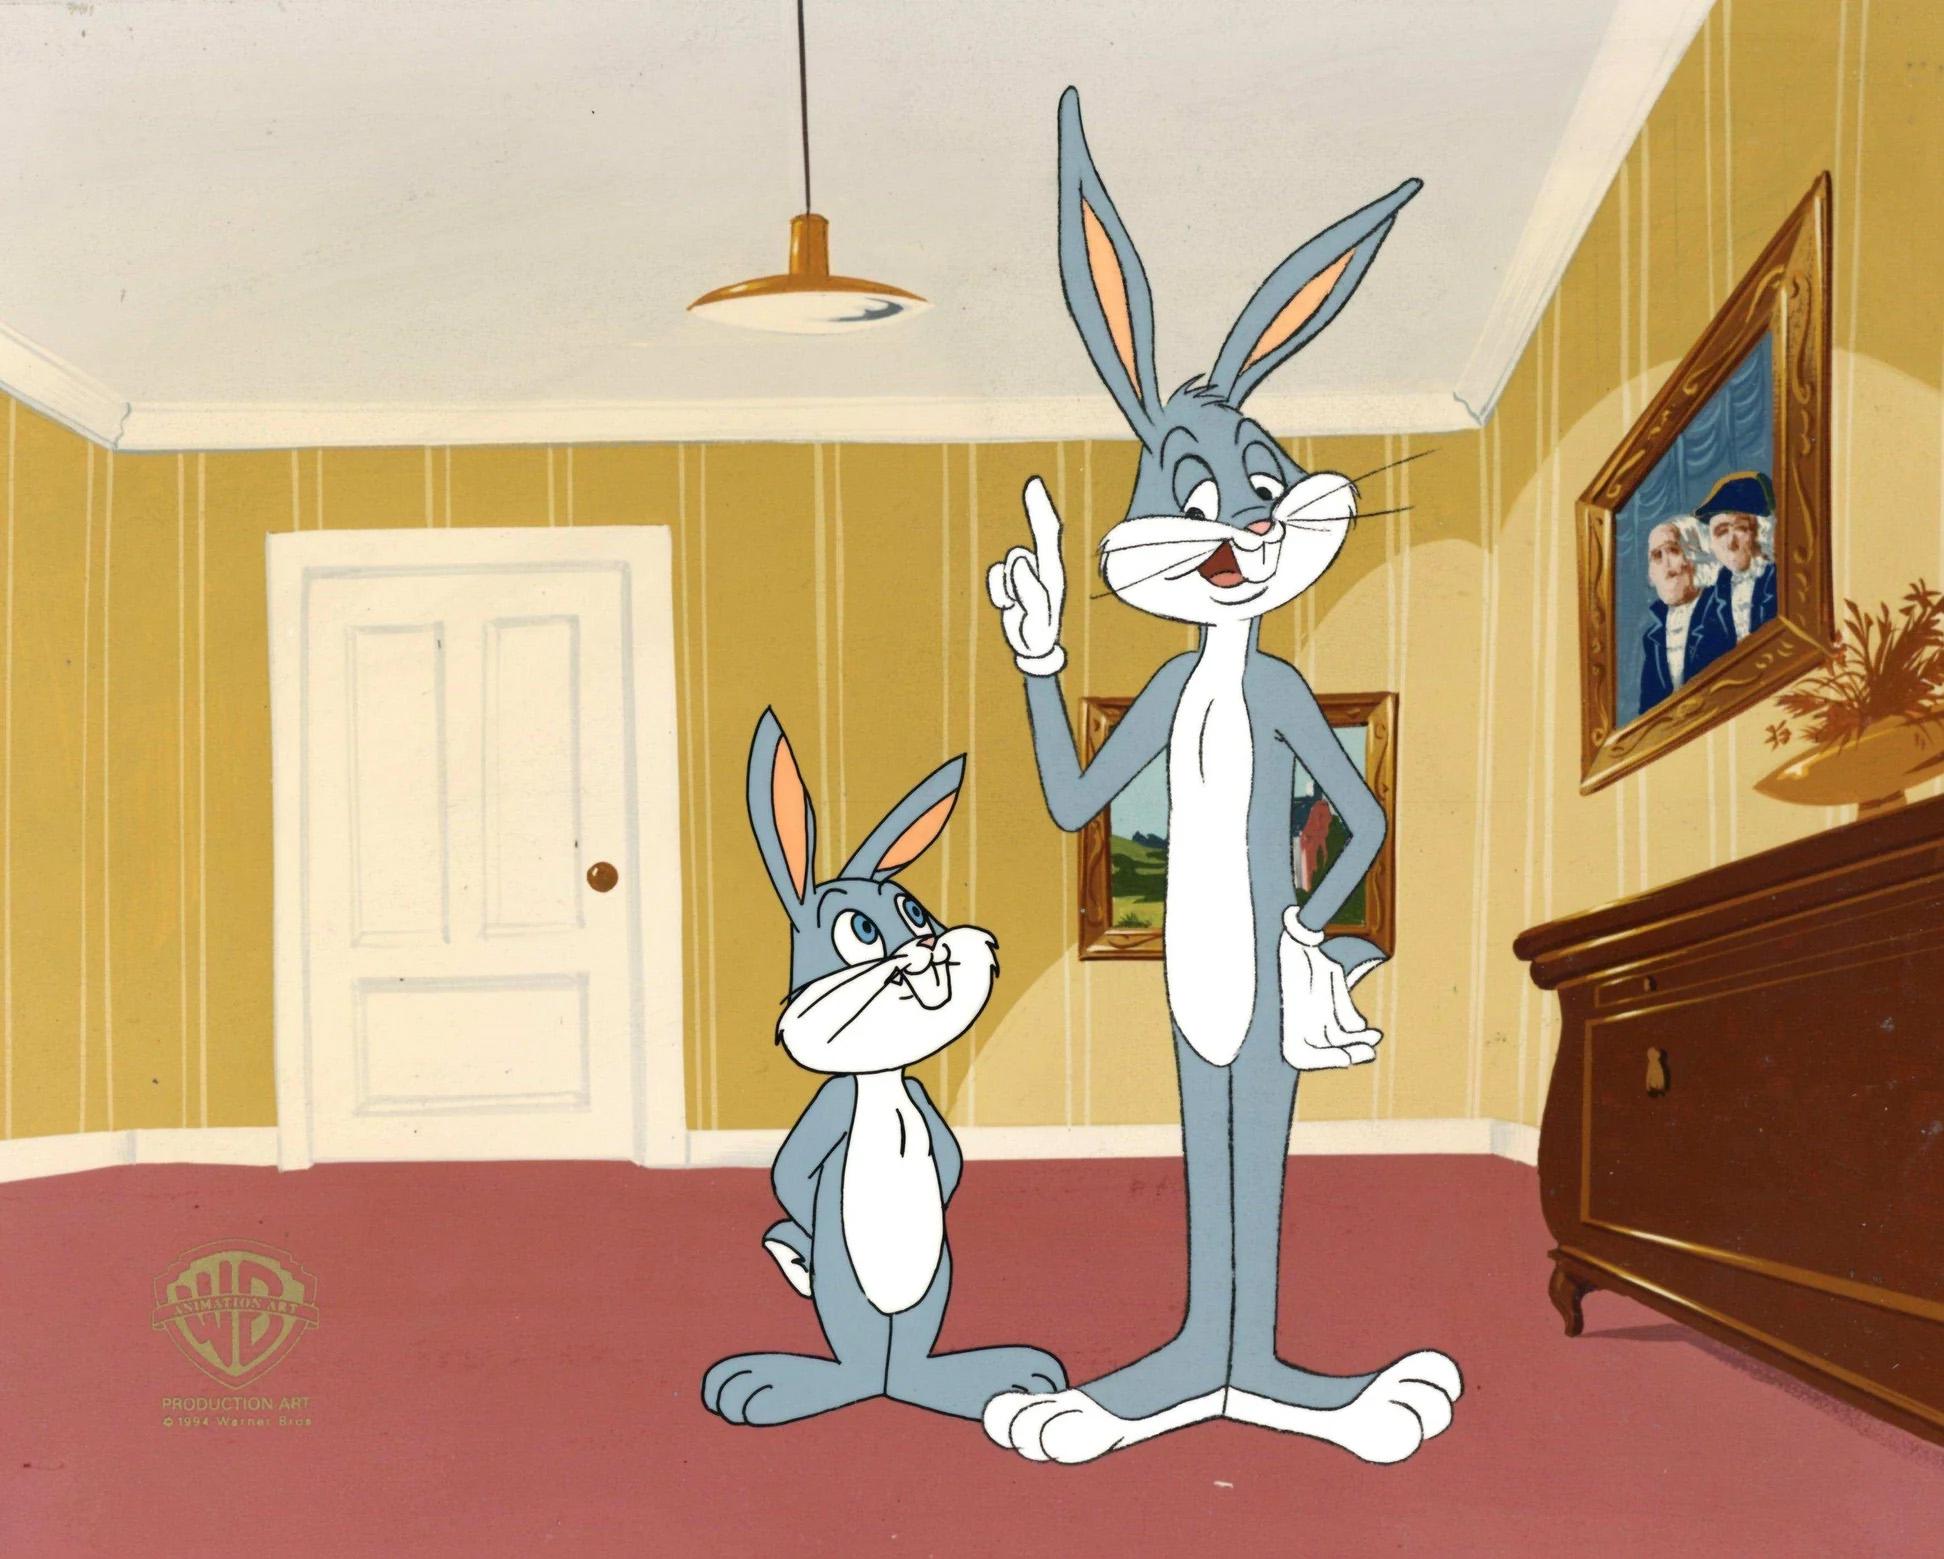 Looney Tunes Original Production Cel: Bugs Bunny and Clyde Bunny - Art by Looney Tunes Studio Artists